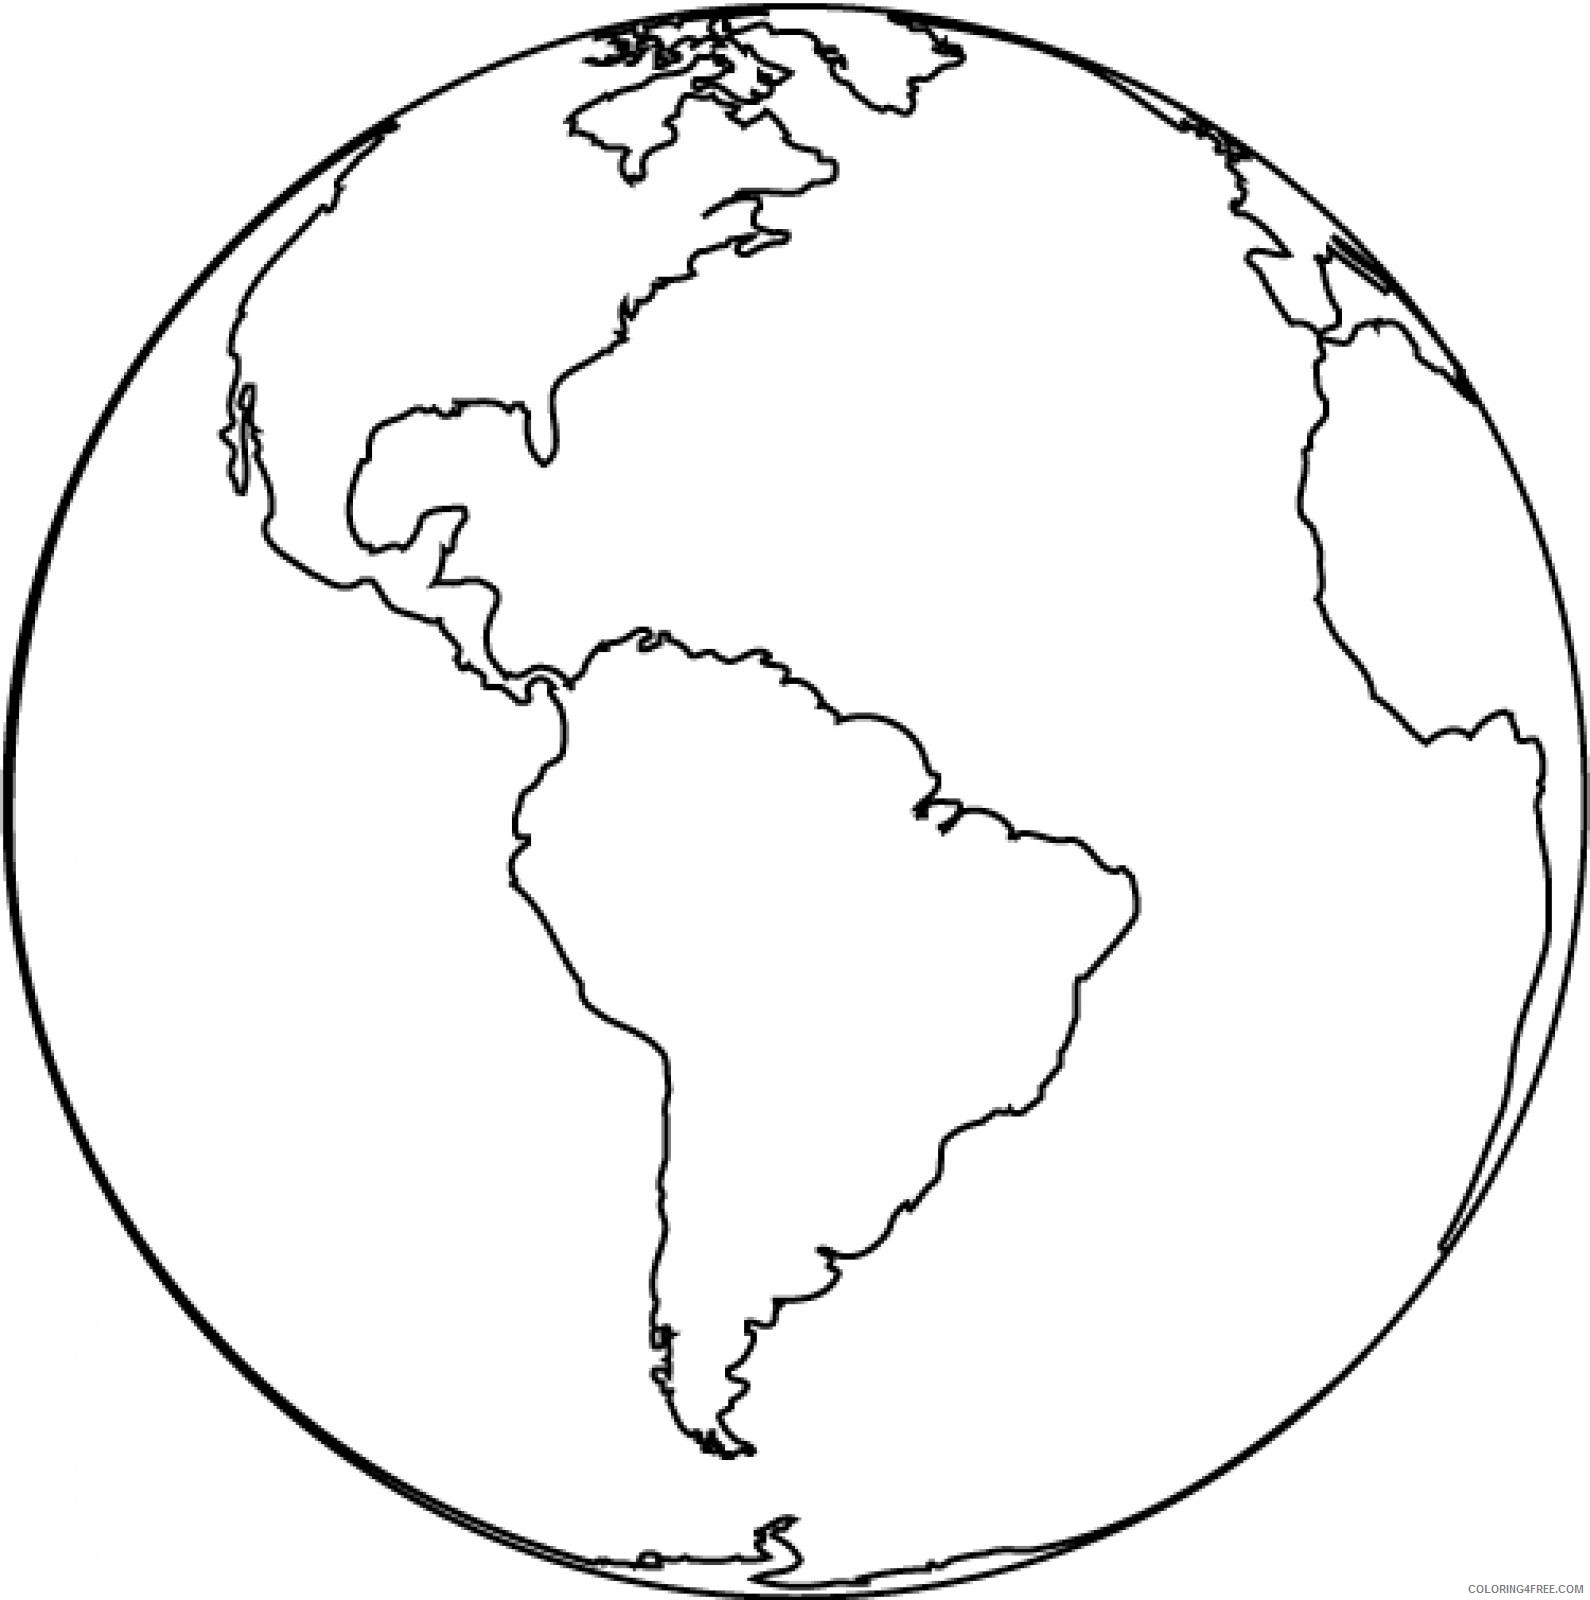 Earth Coloring Pages American Continent Coloring4free Coloring4free Com